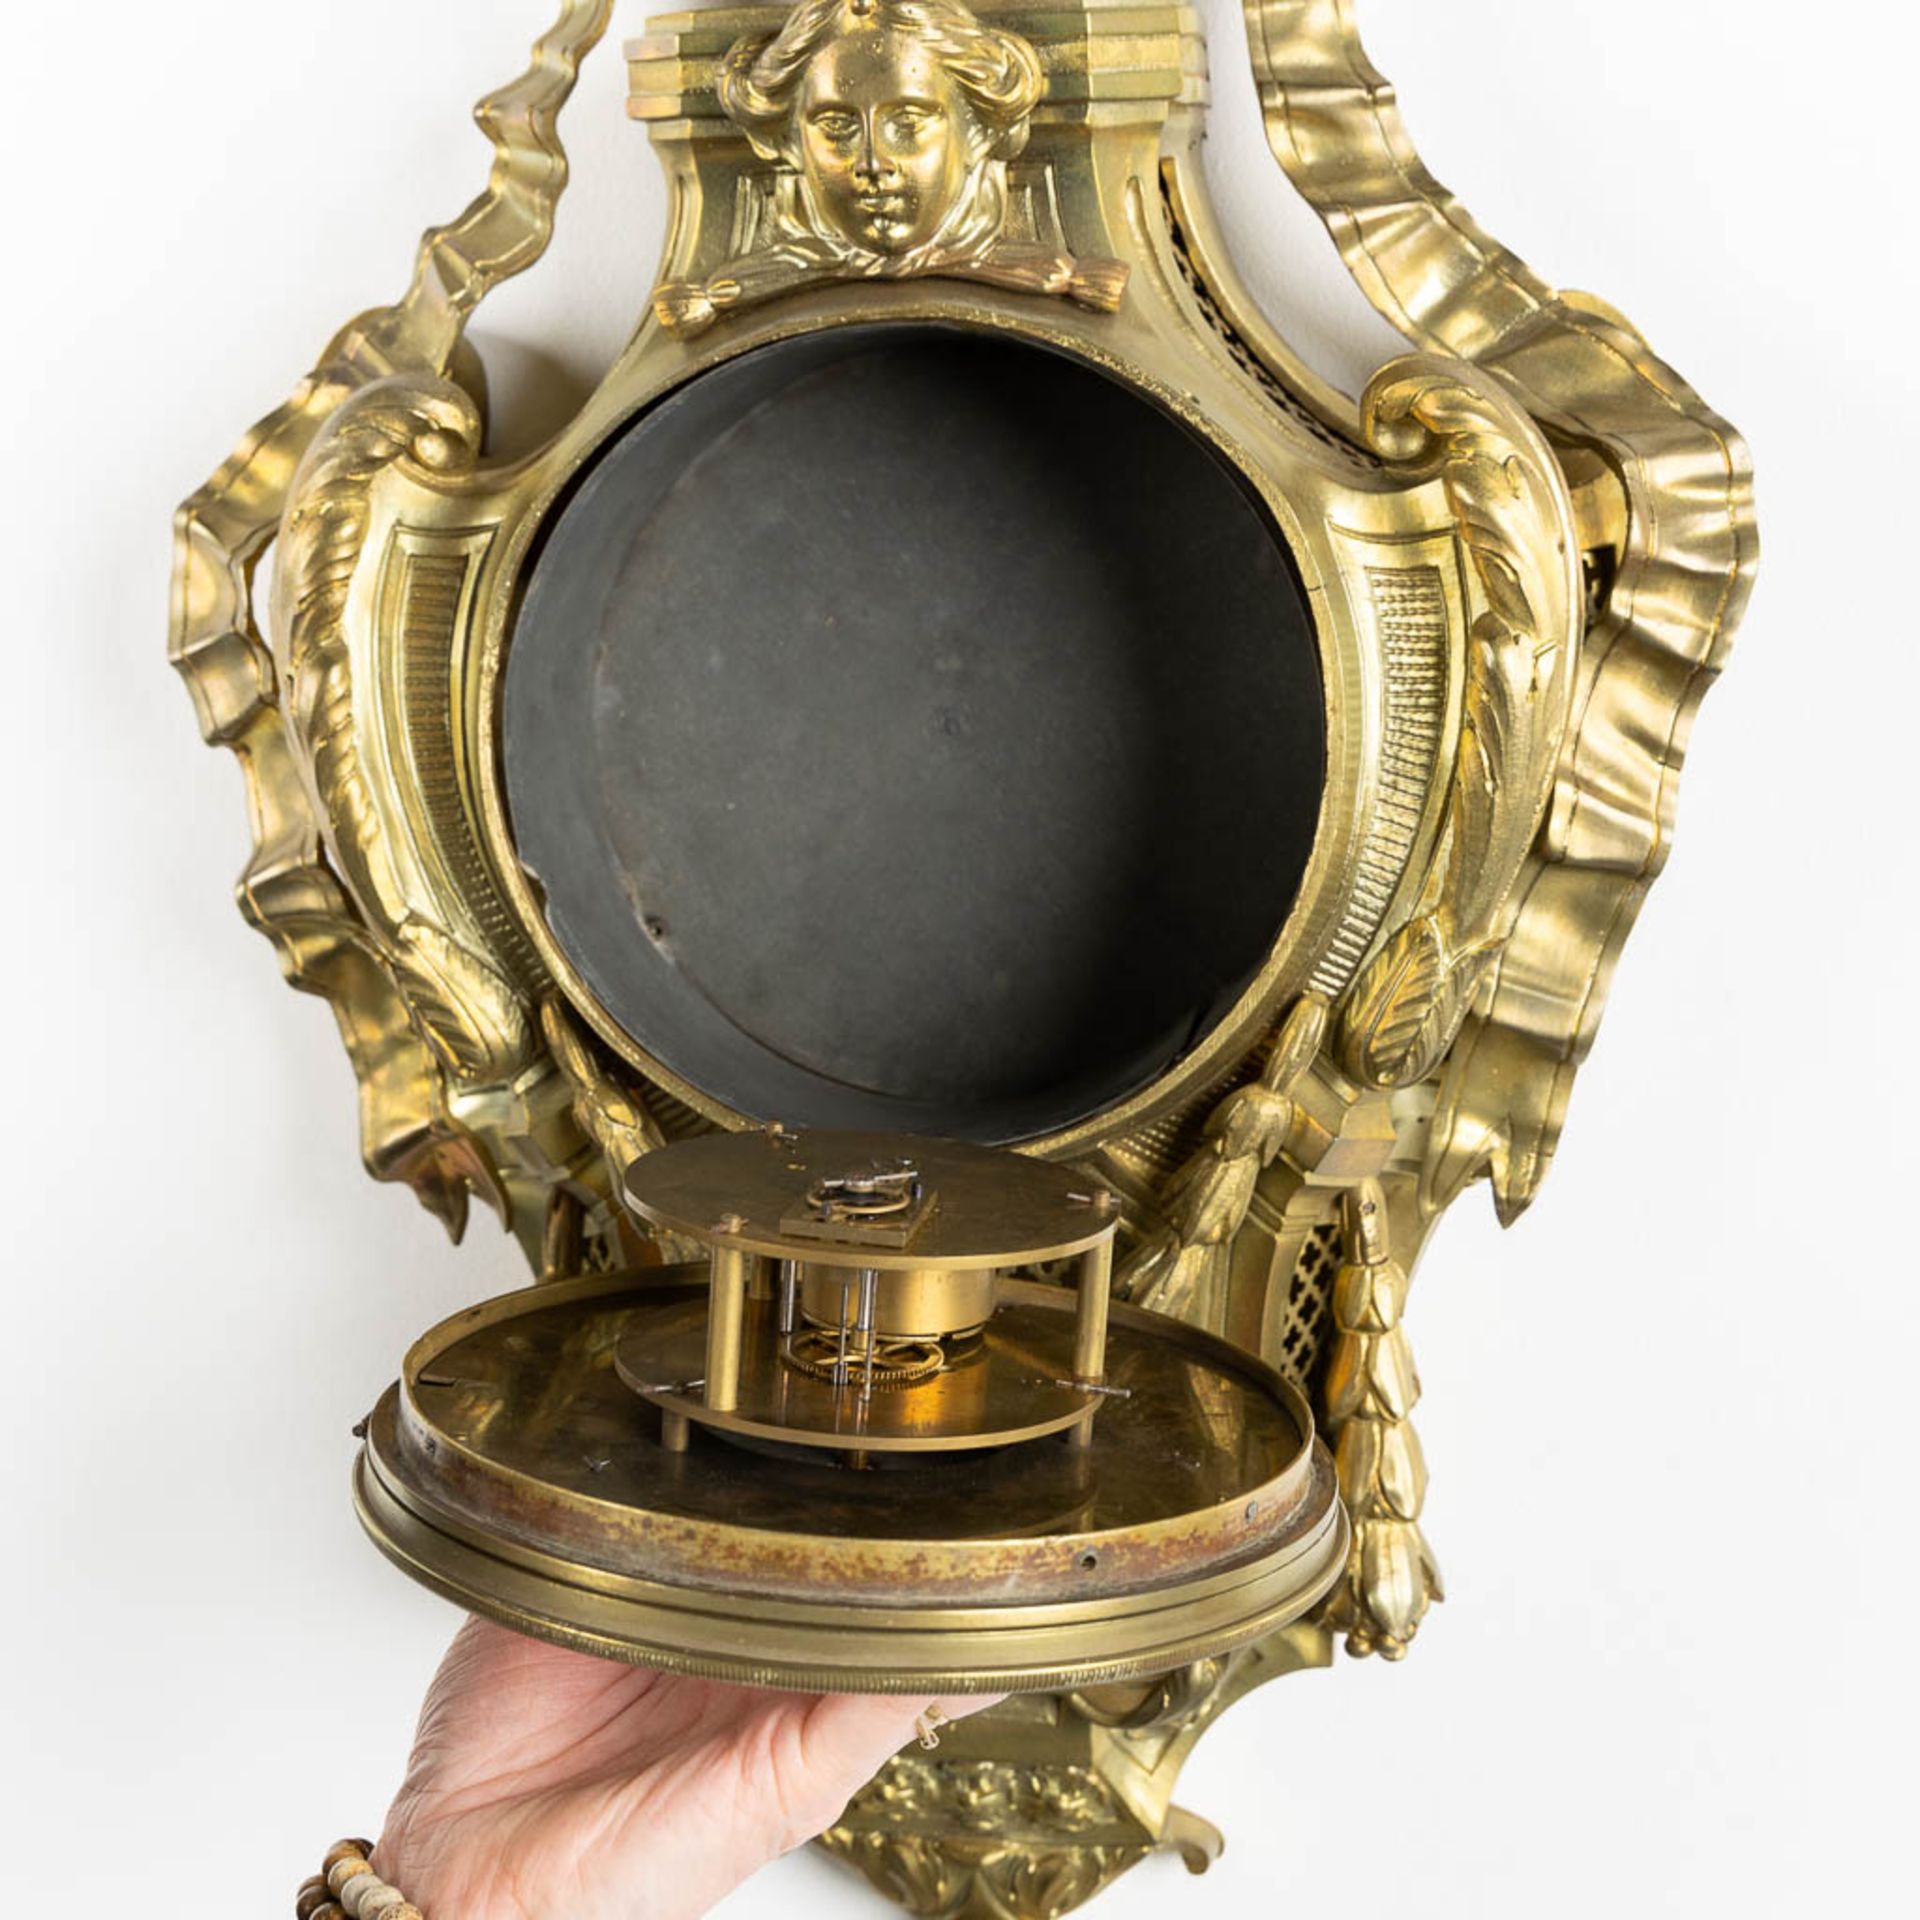 A wall-mounted bronze cartel clock, Louis XVI style. 19th C. (L:12 x W:37 x H:71 cm) - Image 6 of 7